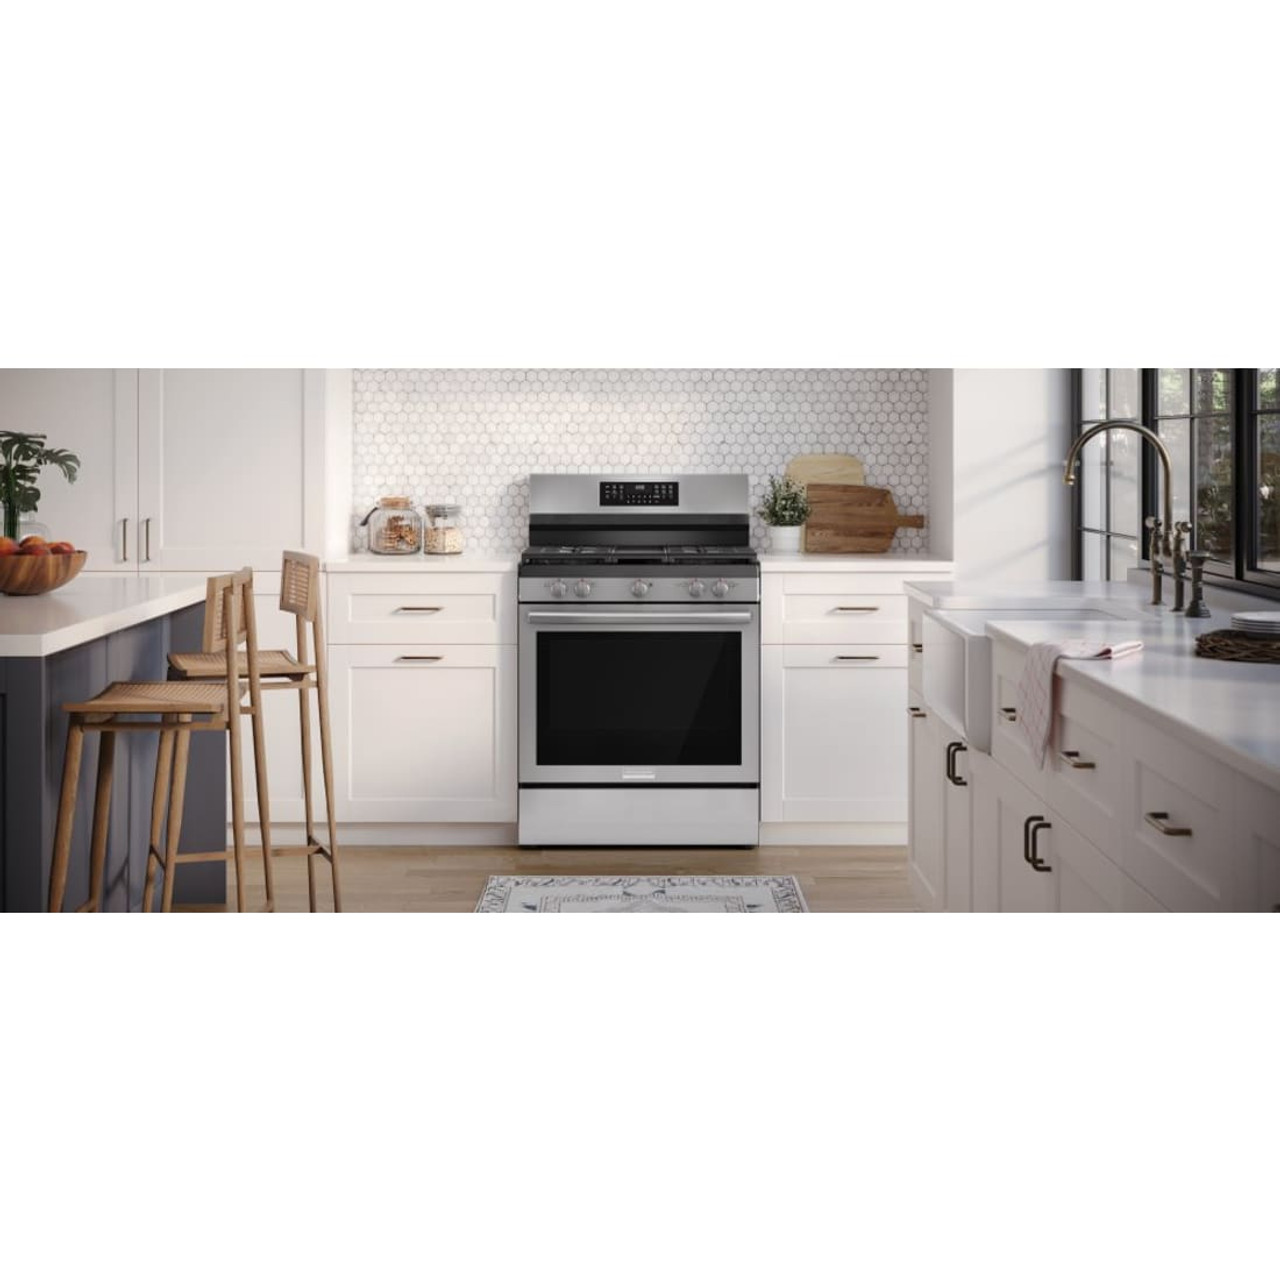 Frigidaire Gallery 30” Rear Control Gas Range with Total Convection - GCRG3060BF